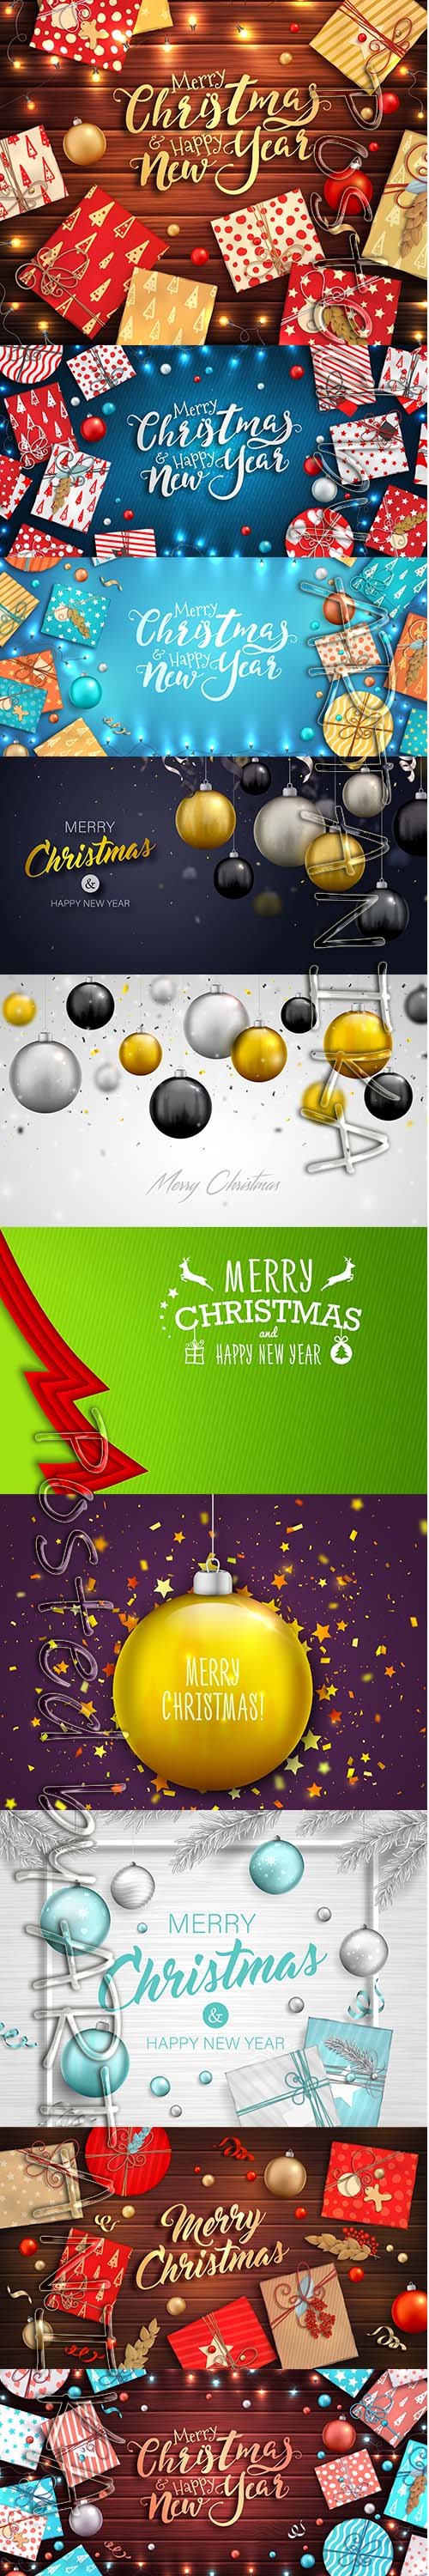 Merry Christmas and New Year 2020 Vector Illustrations Pack Vol 17